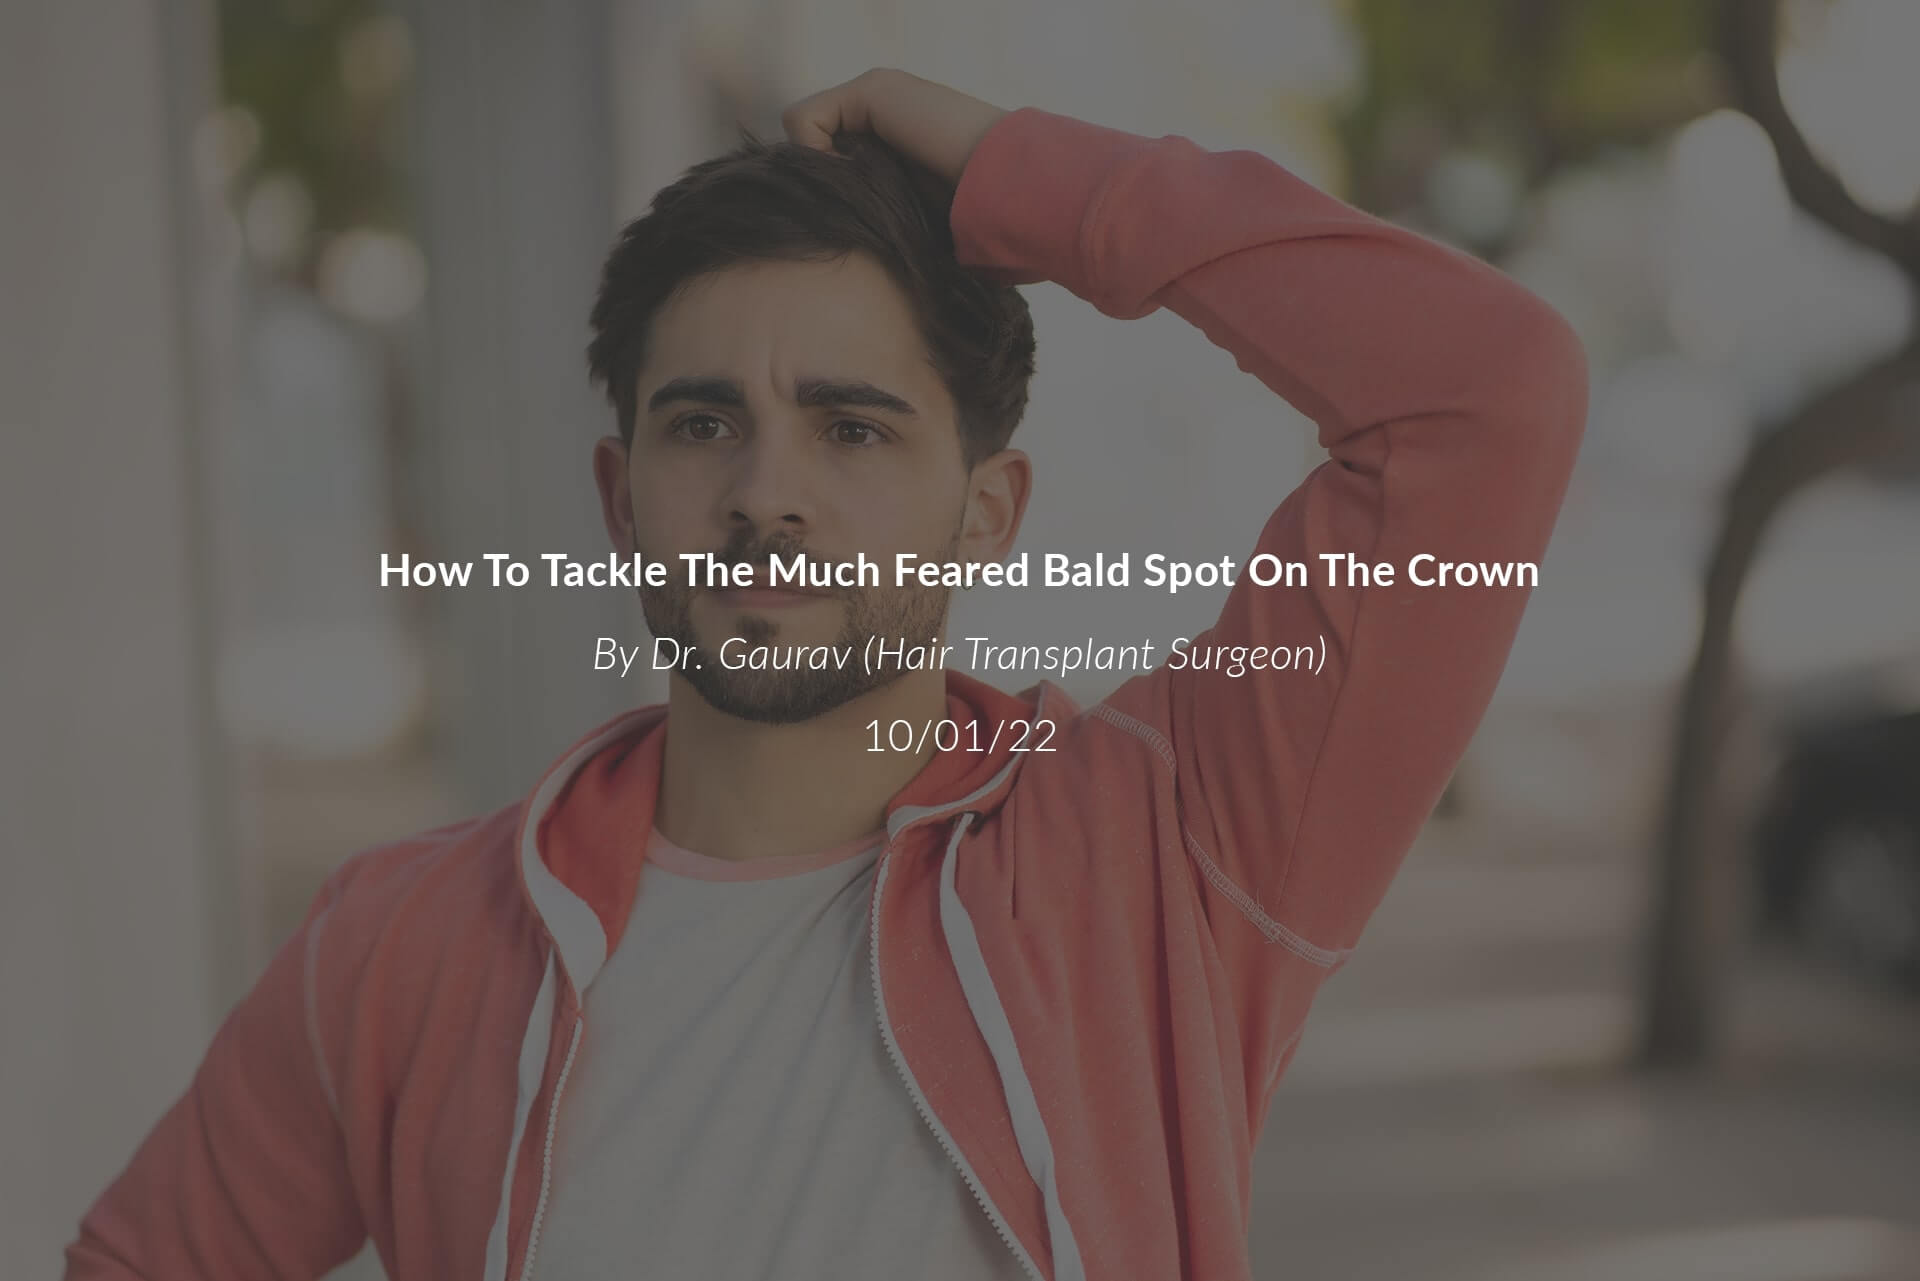 How To Tackle the Much Feared Bald Spot On The Crown?